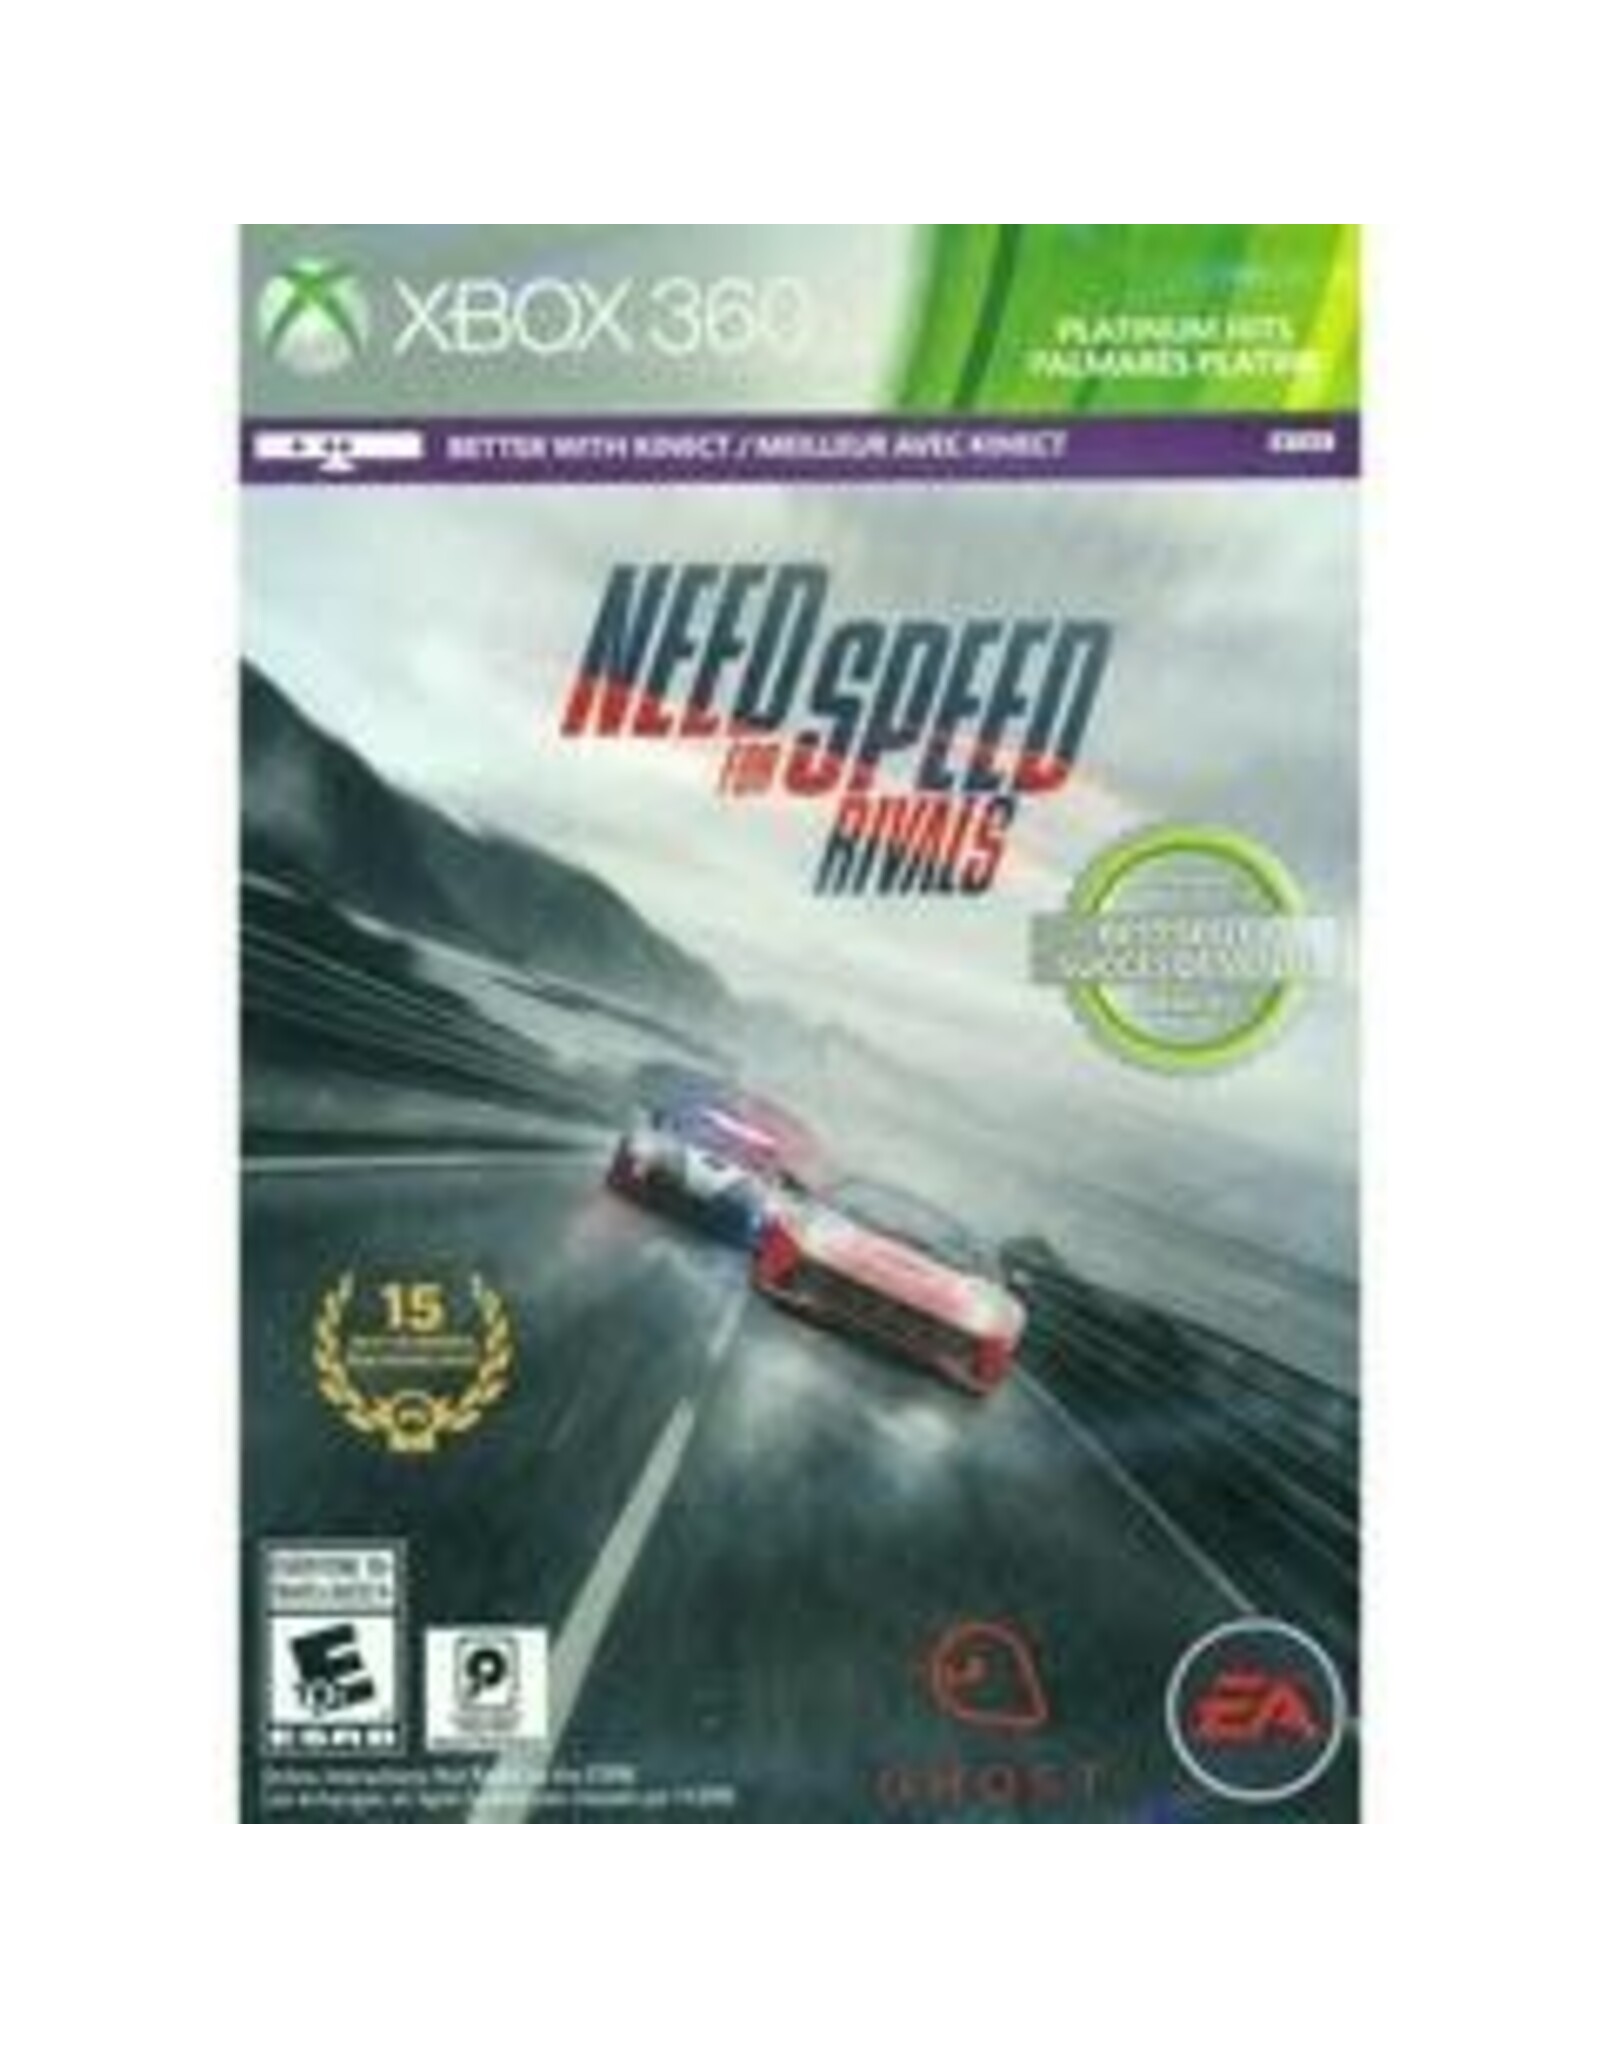 Xbox 360 Need for Speed Rivals (Platinum Hits, No Manual)